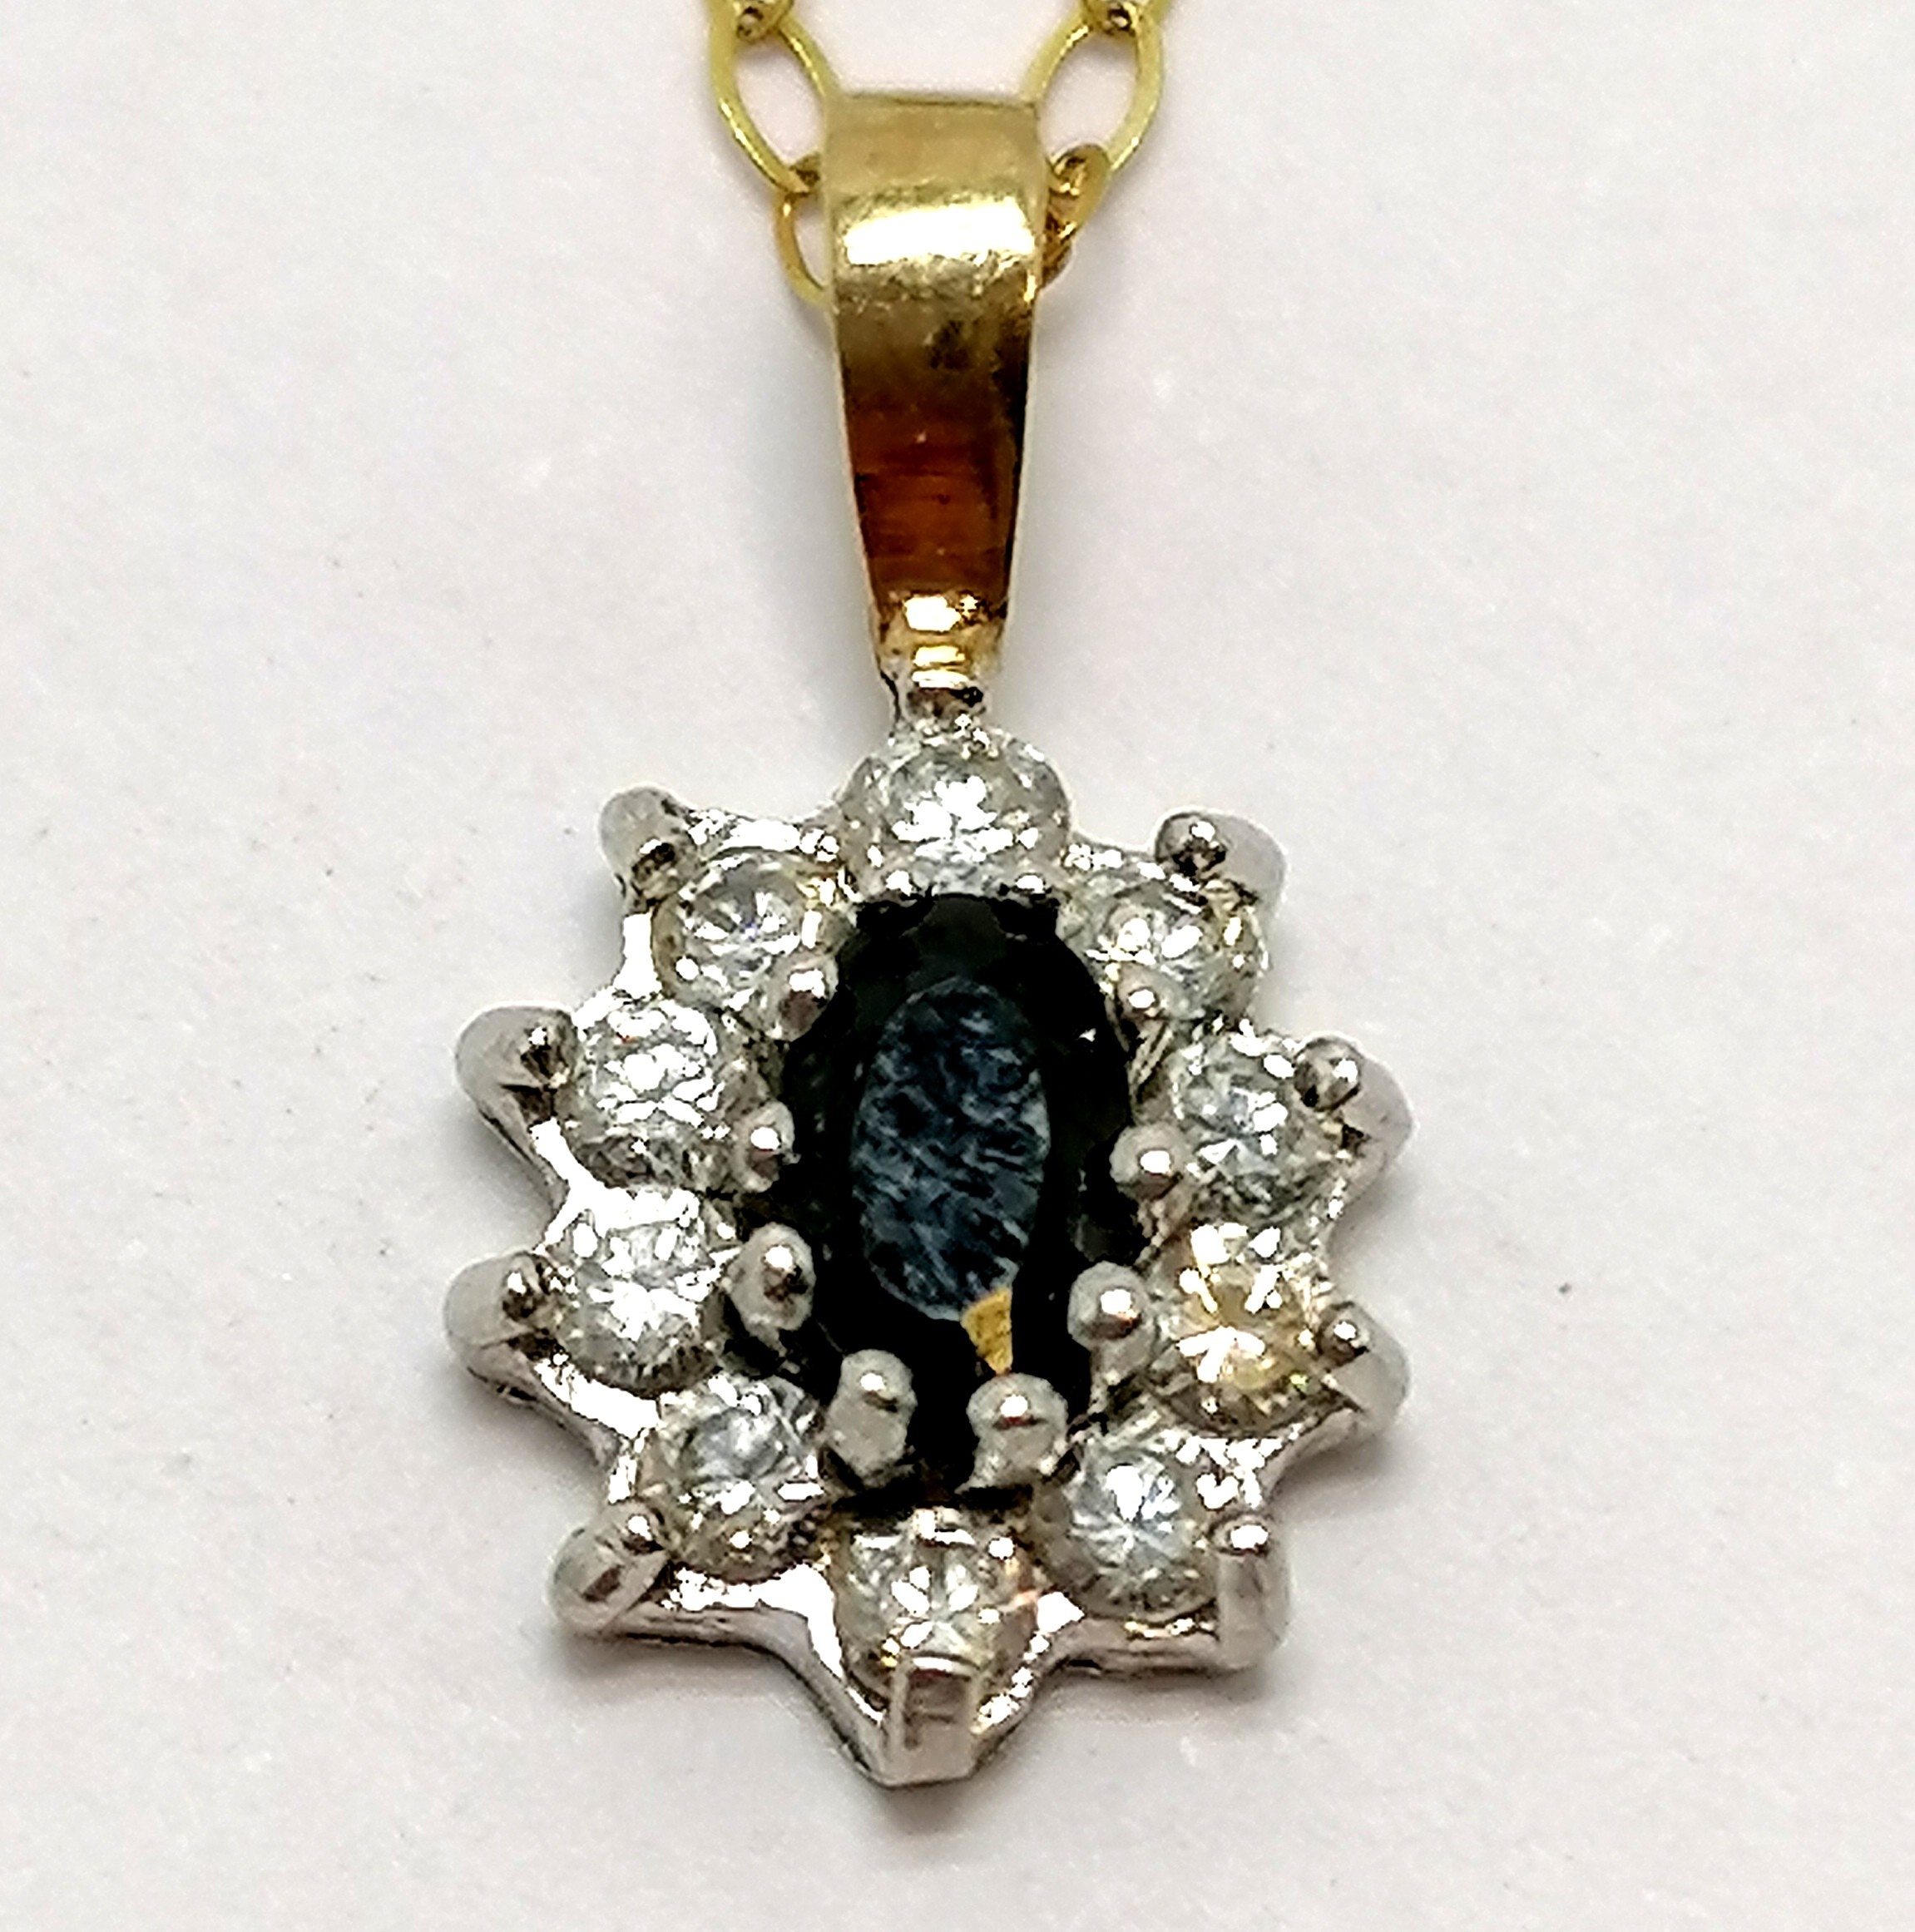 Unmarked gold sapphire & white stone pendant on a fine 9ct marked gold 40cm chain - total weight 1g - Image 3 of 3